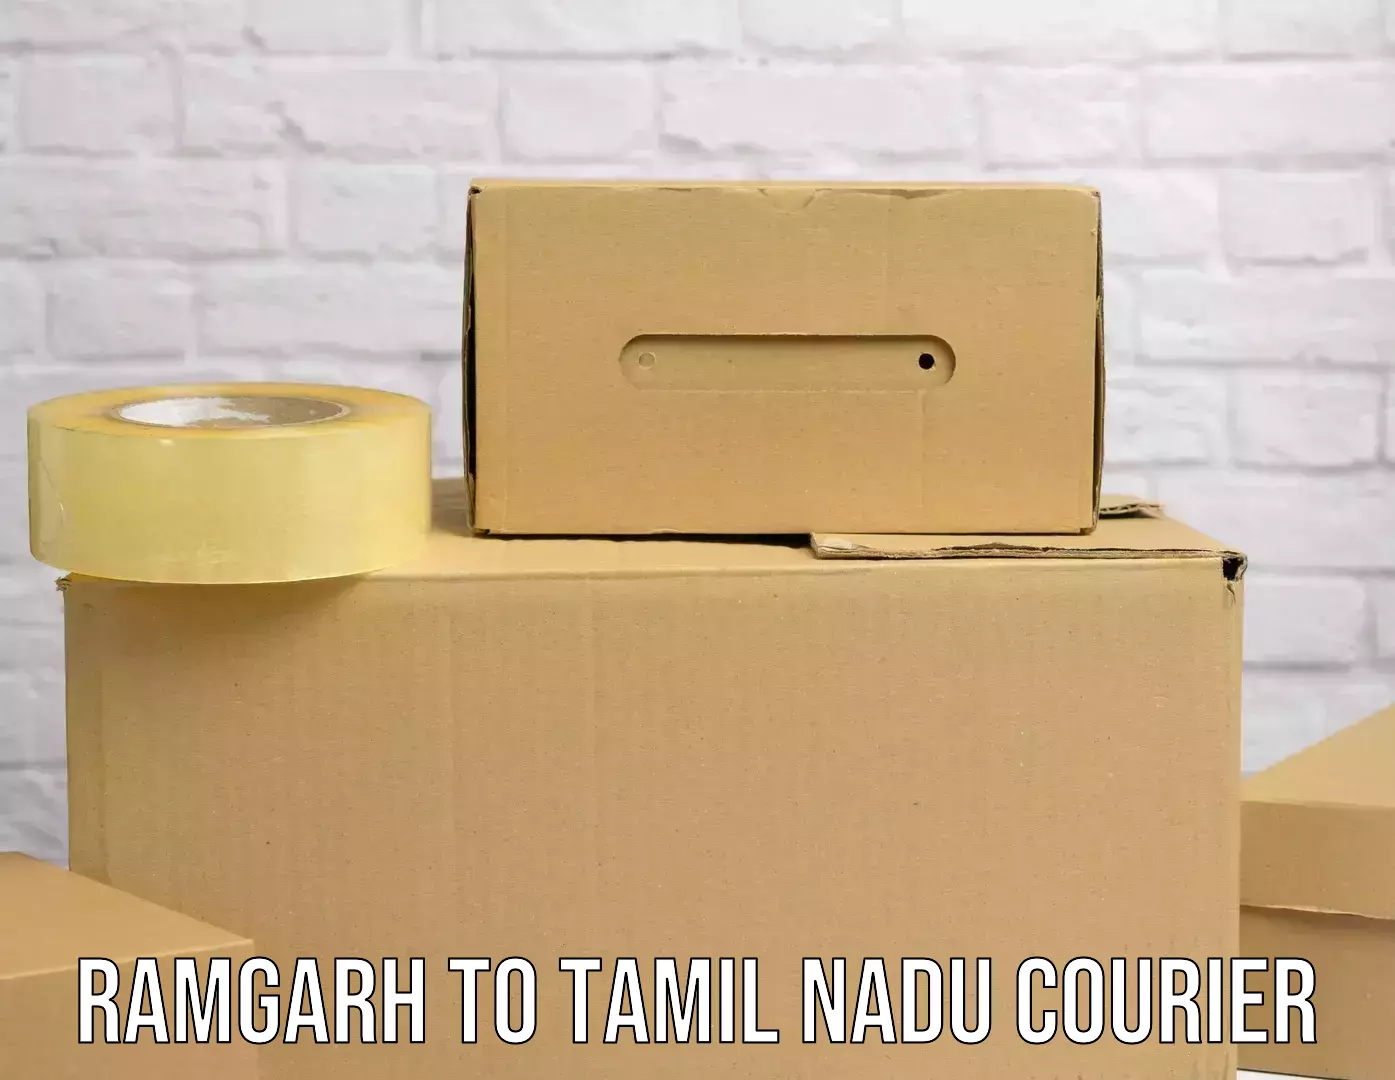 Digital courier platforms in Ramgarh to Cuddalore